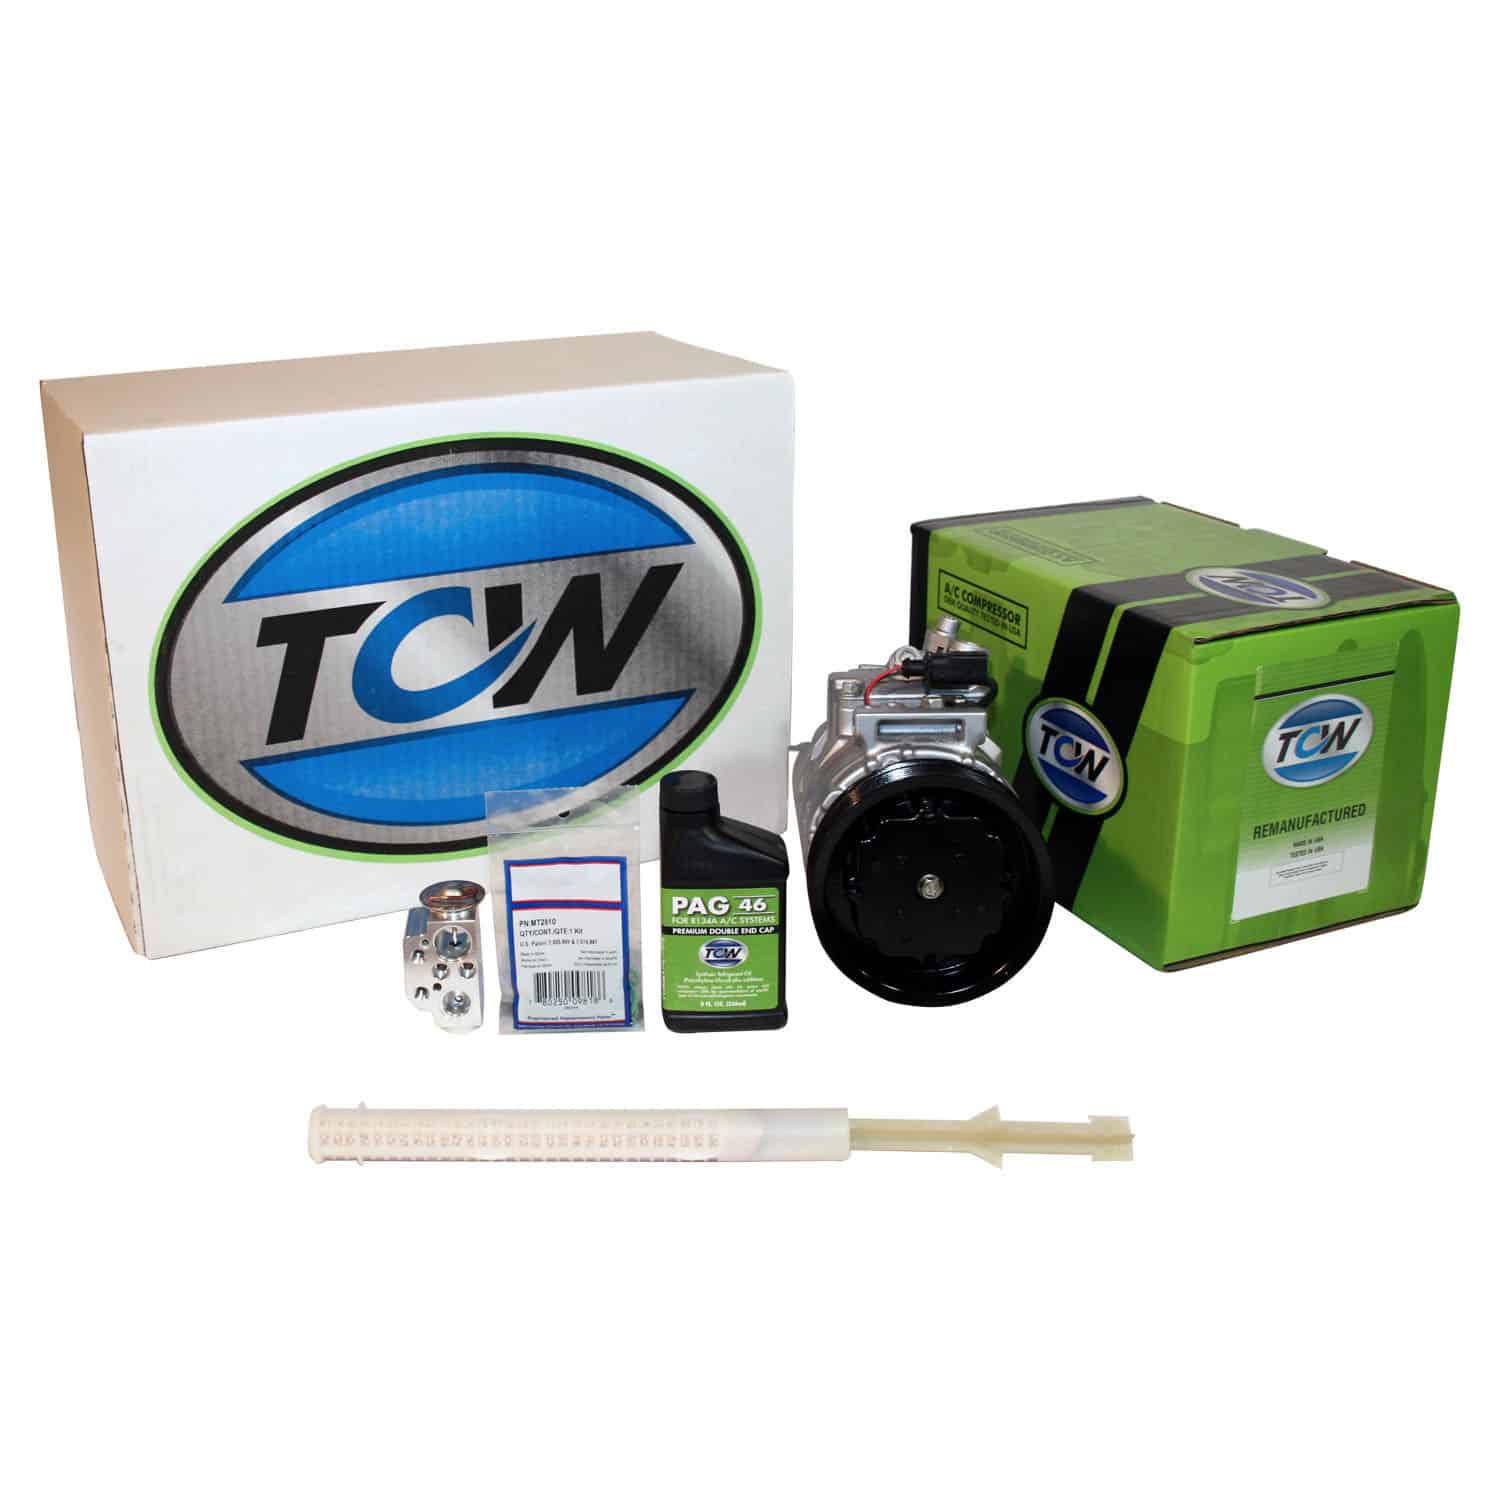 TCW Vehicle A/C Kit K1000426R Remanufactured Product Image field_60b6a13a6e67c